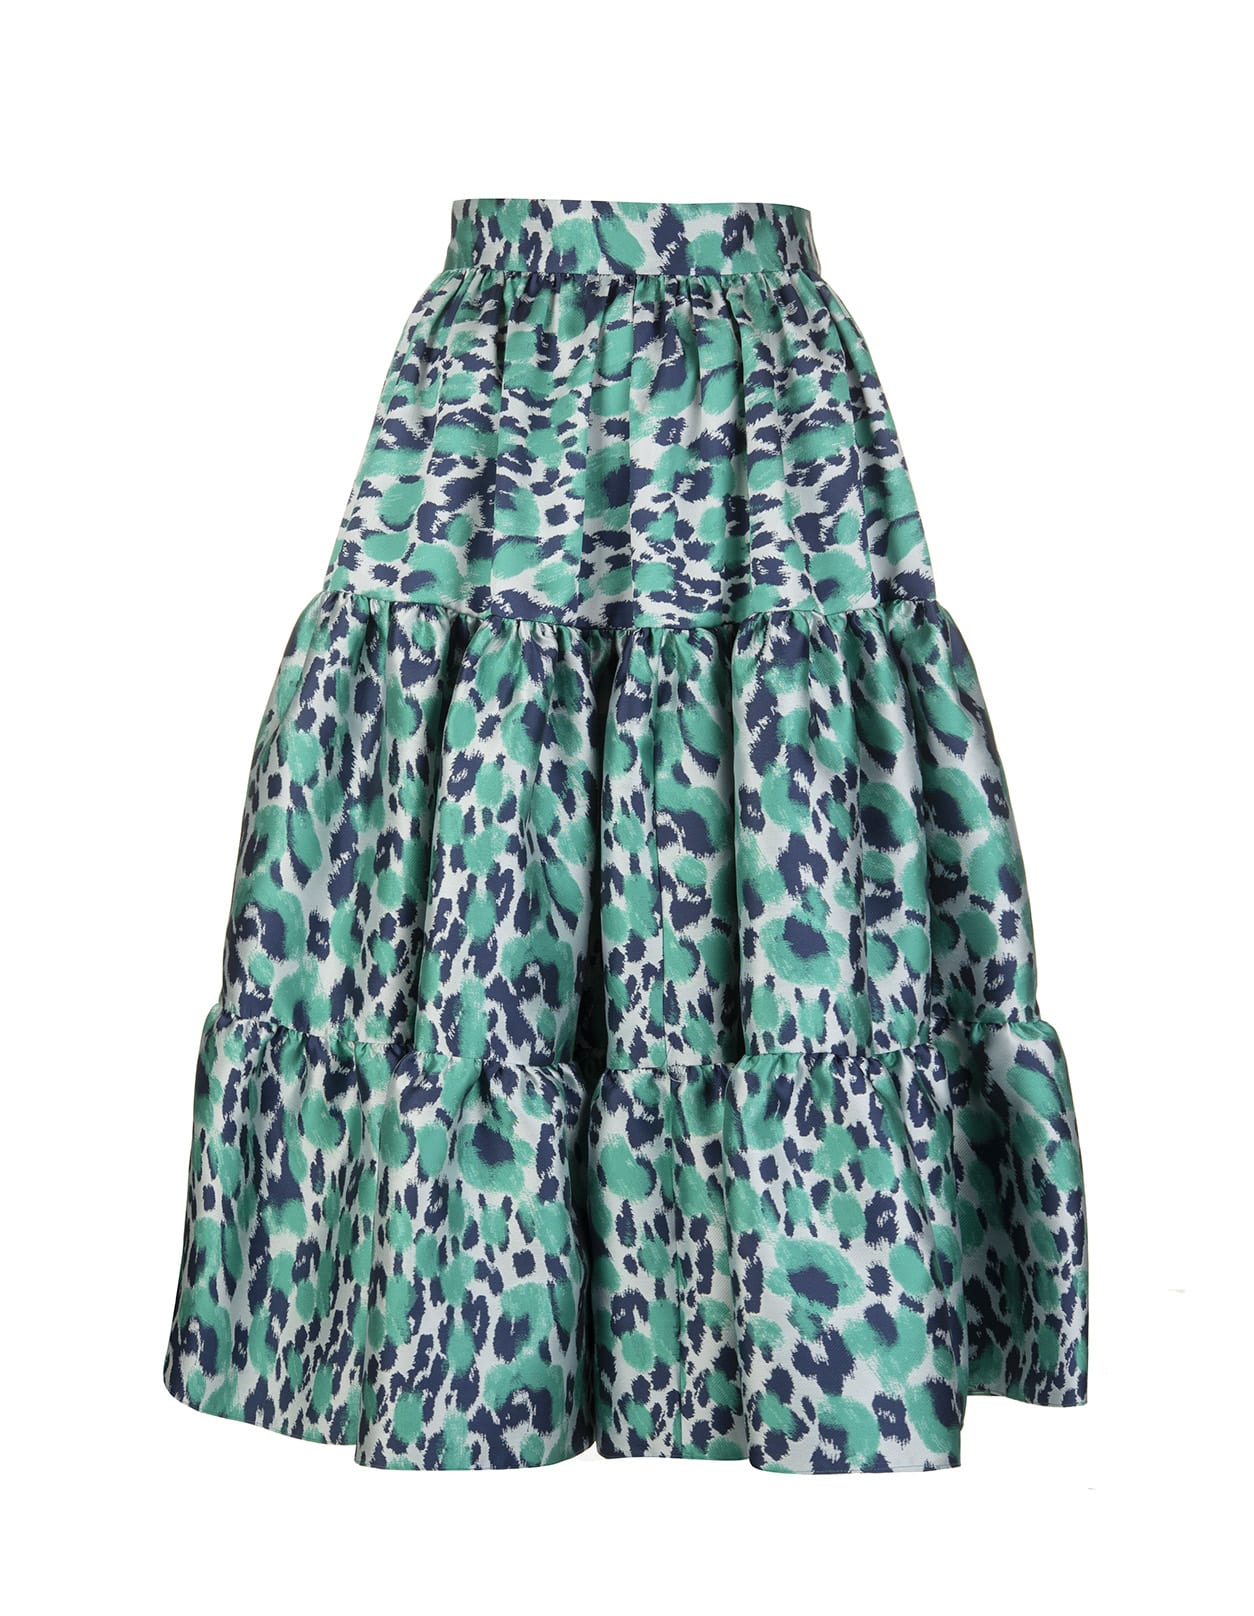 Gianluca Capannolo White/green/teal Leopard Print Flared Pleated Skirt